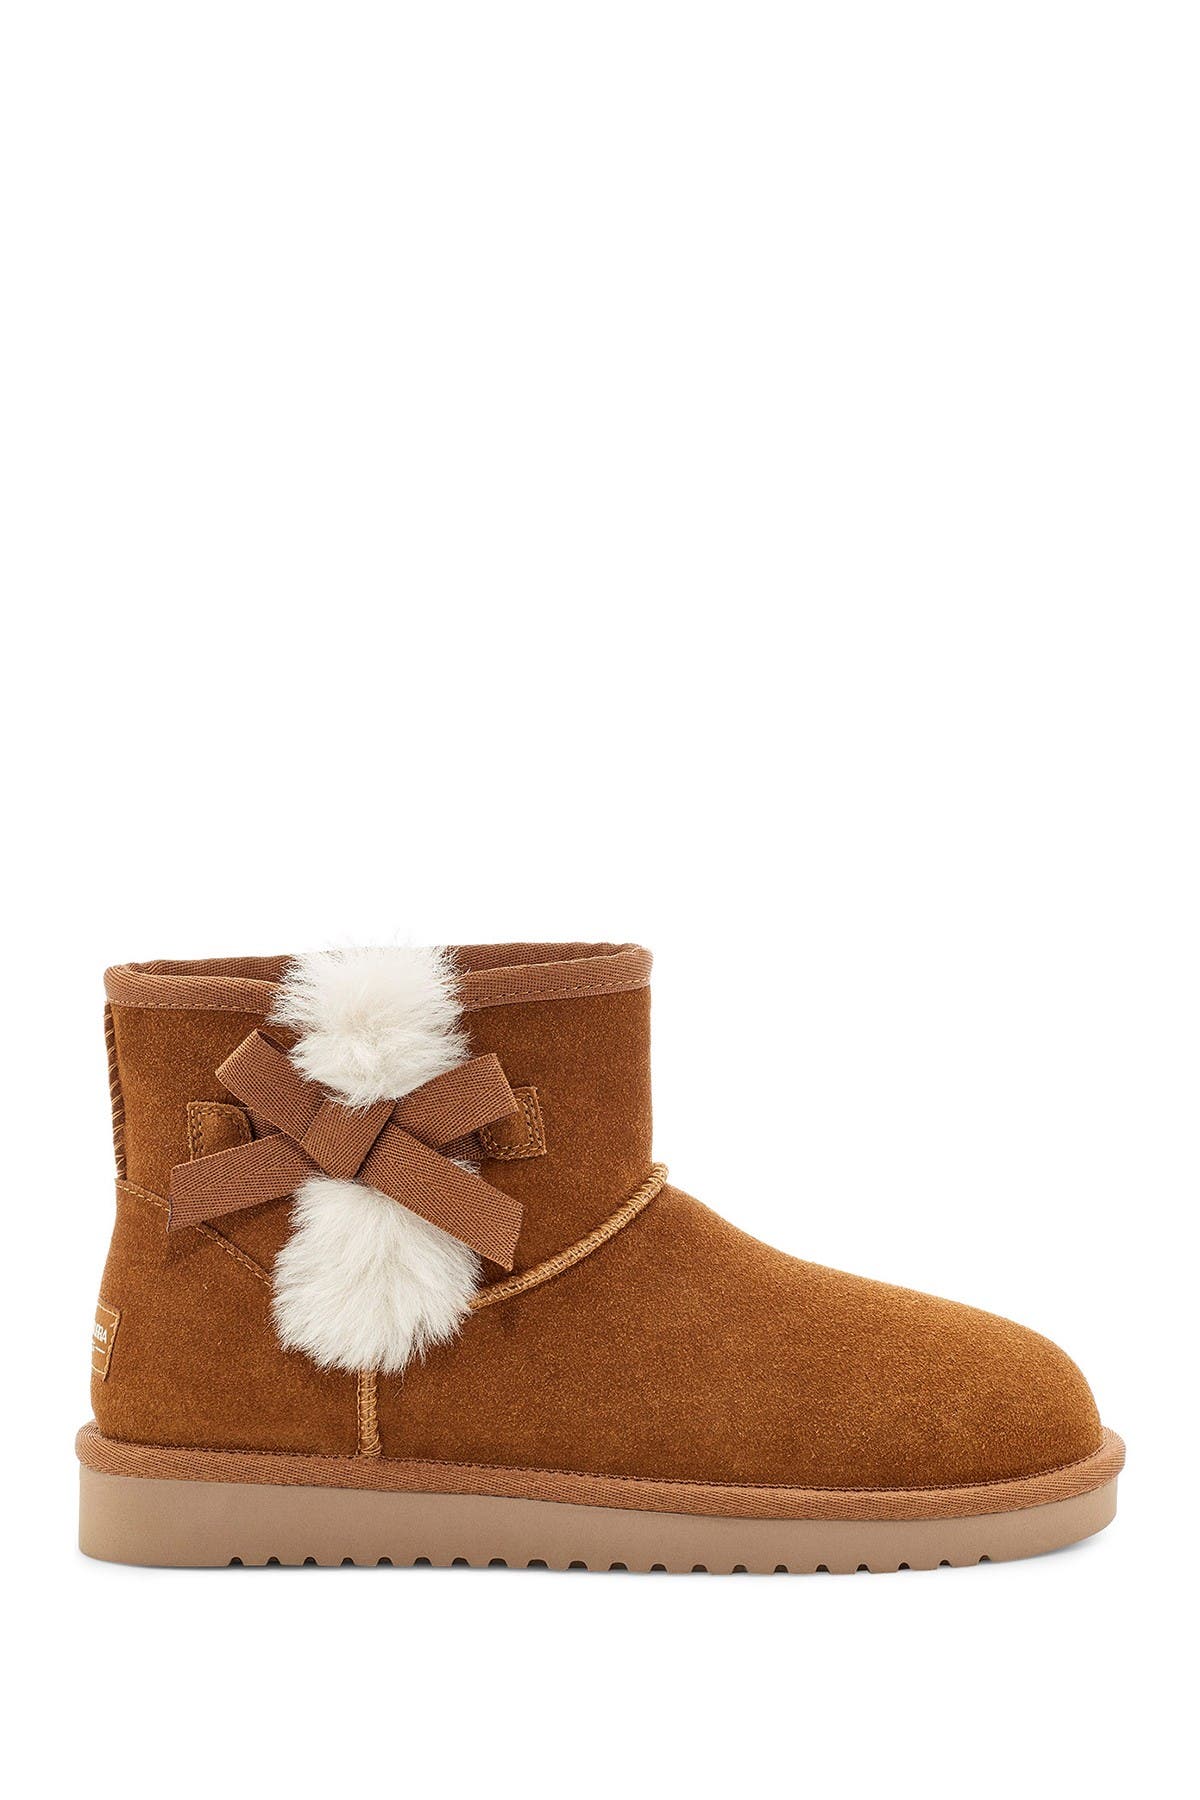 leather ugg boots with fur trim